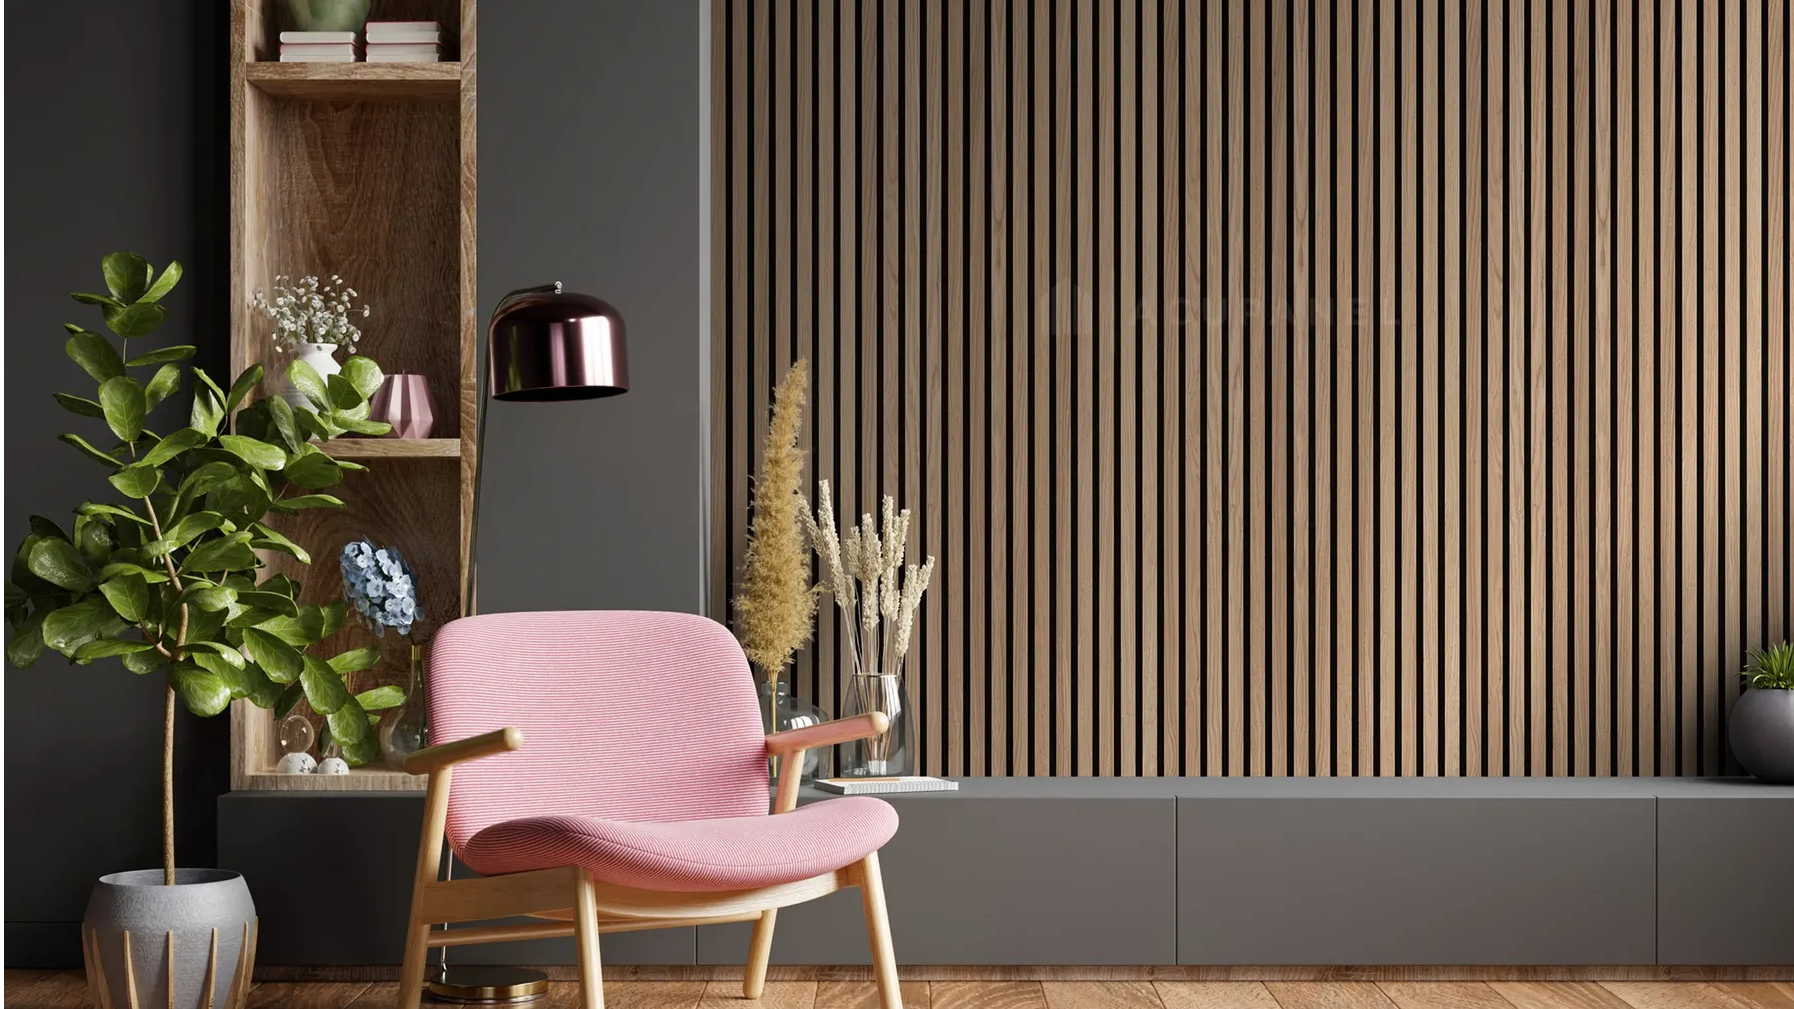 Noise reducing wood wall panels applied in modern interior.